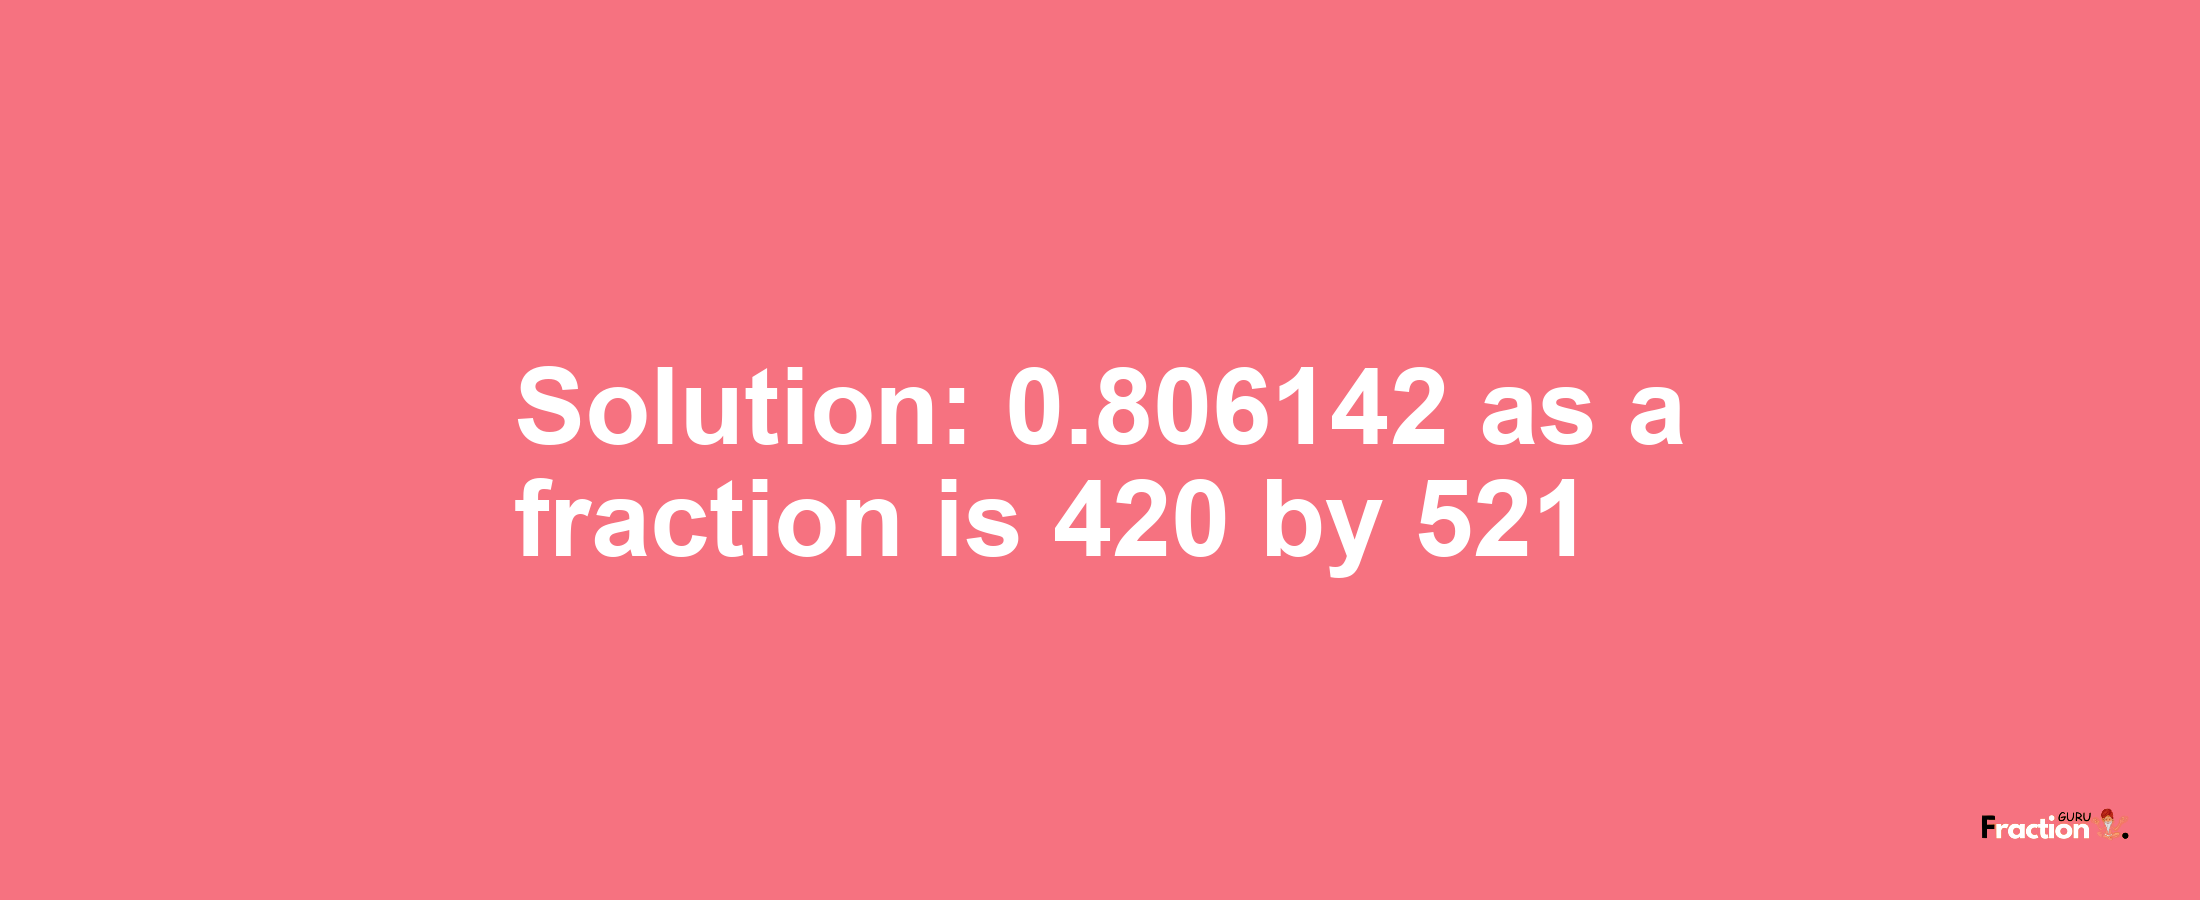 Solution:0.806142 as a fraction is 420/521